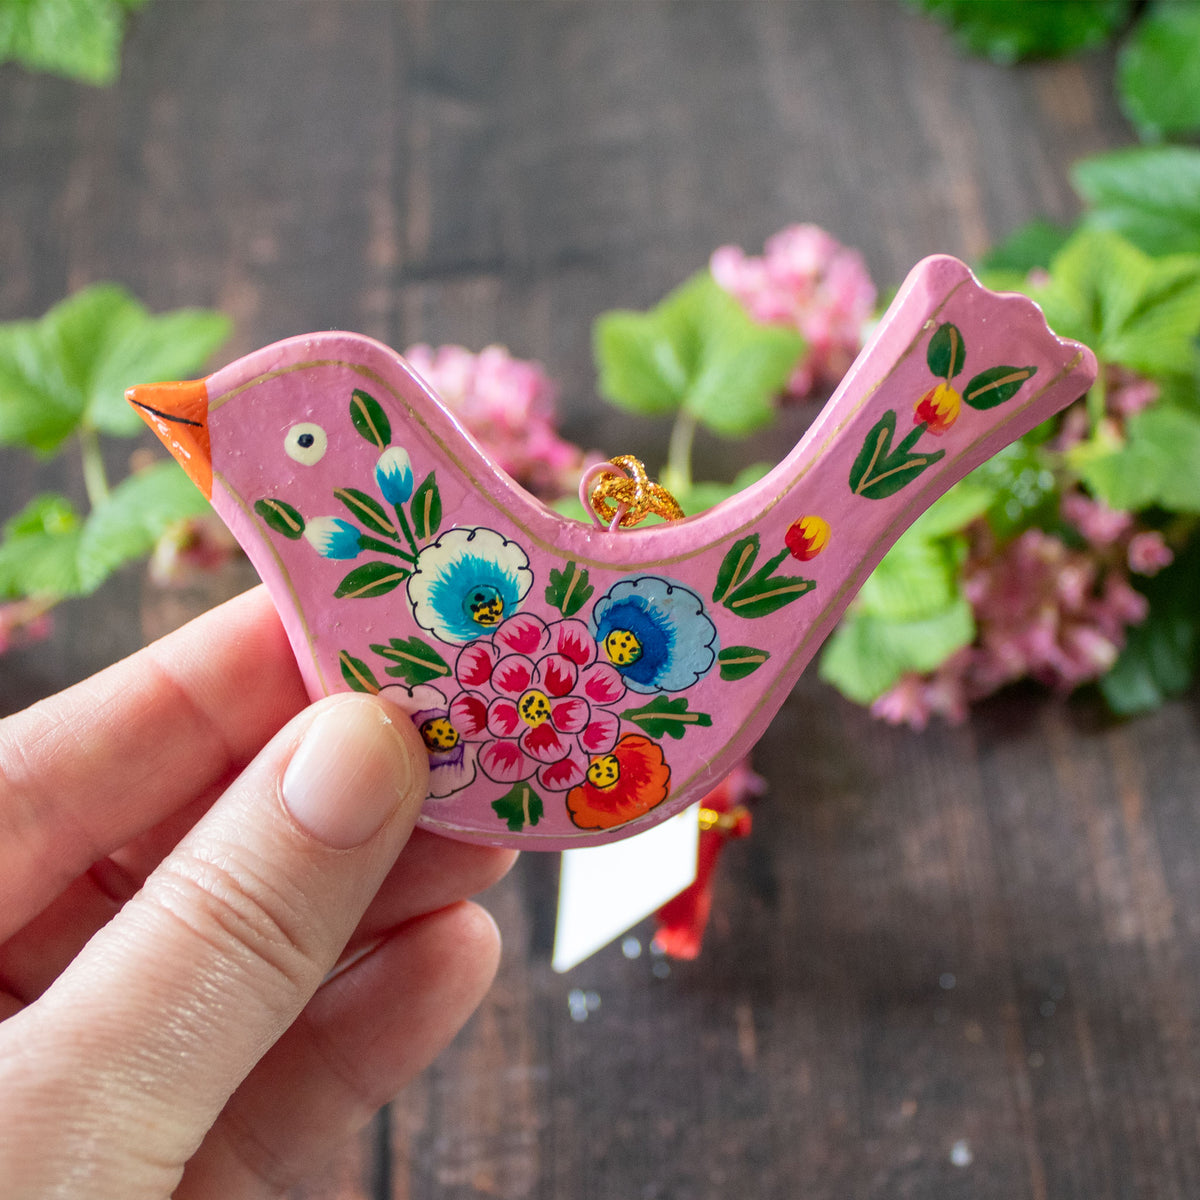 Hanging Spring Decoration - Painted Bird- Pink Flowers